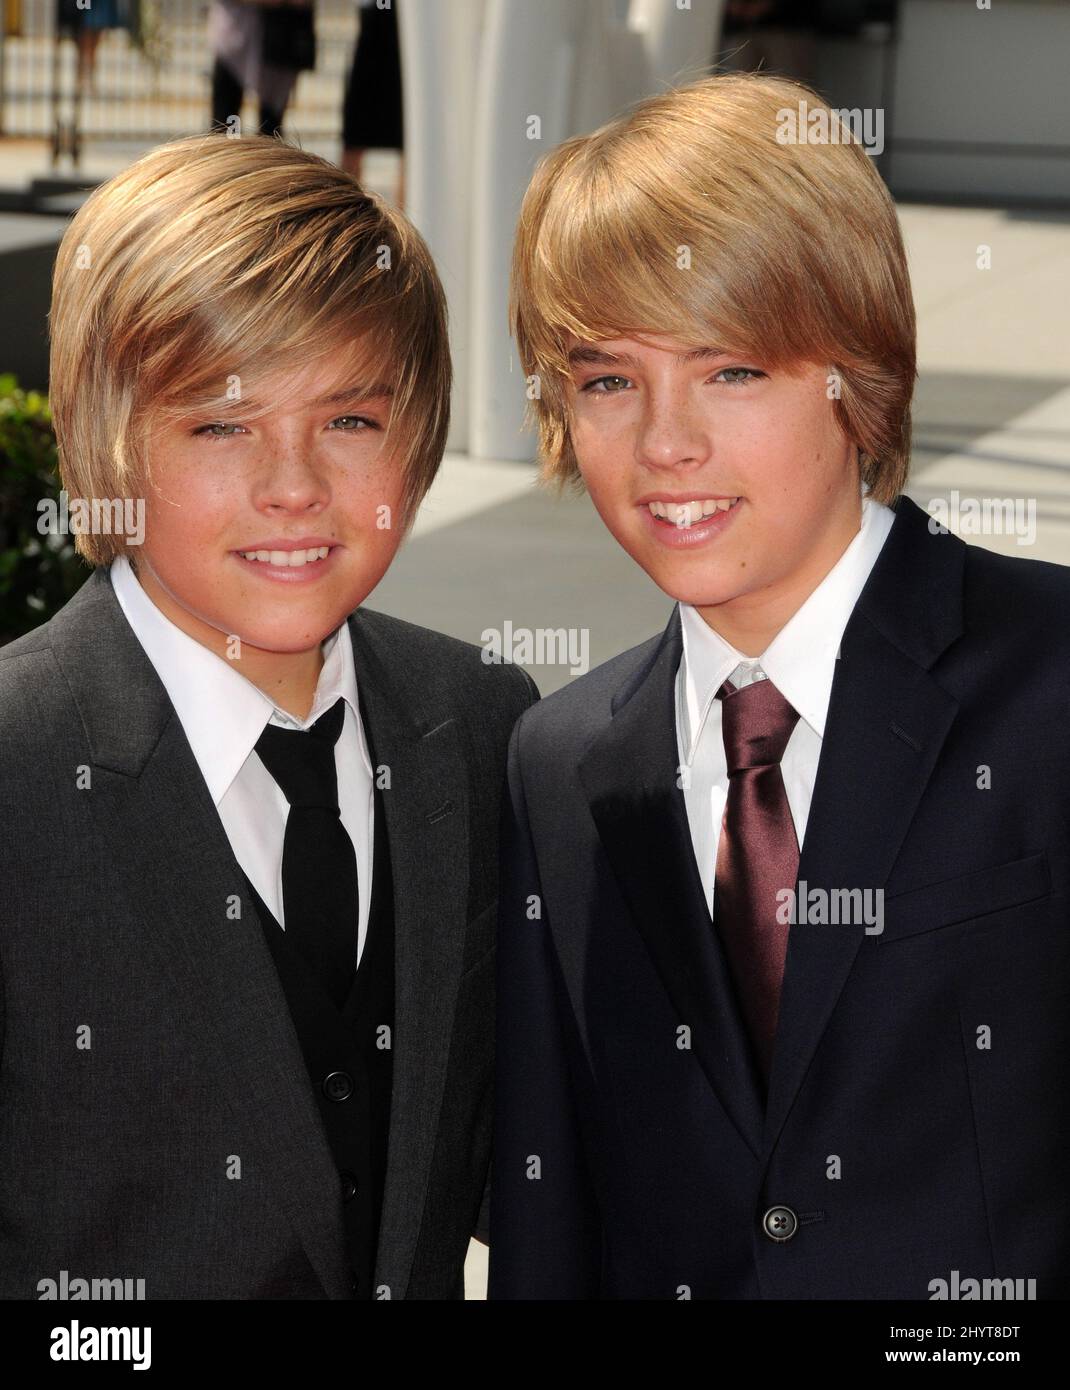 Dylan Sprouse and Cole Sprouse arriving at the 60th Primetime Creative Arts Emmy Awards held at the Nokia Theatre, Los Angeles. Stock Photo